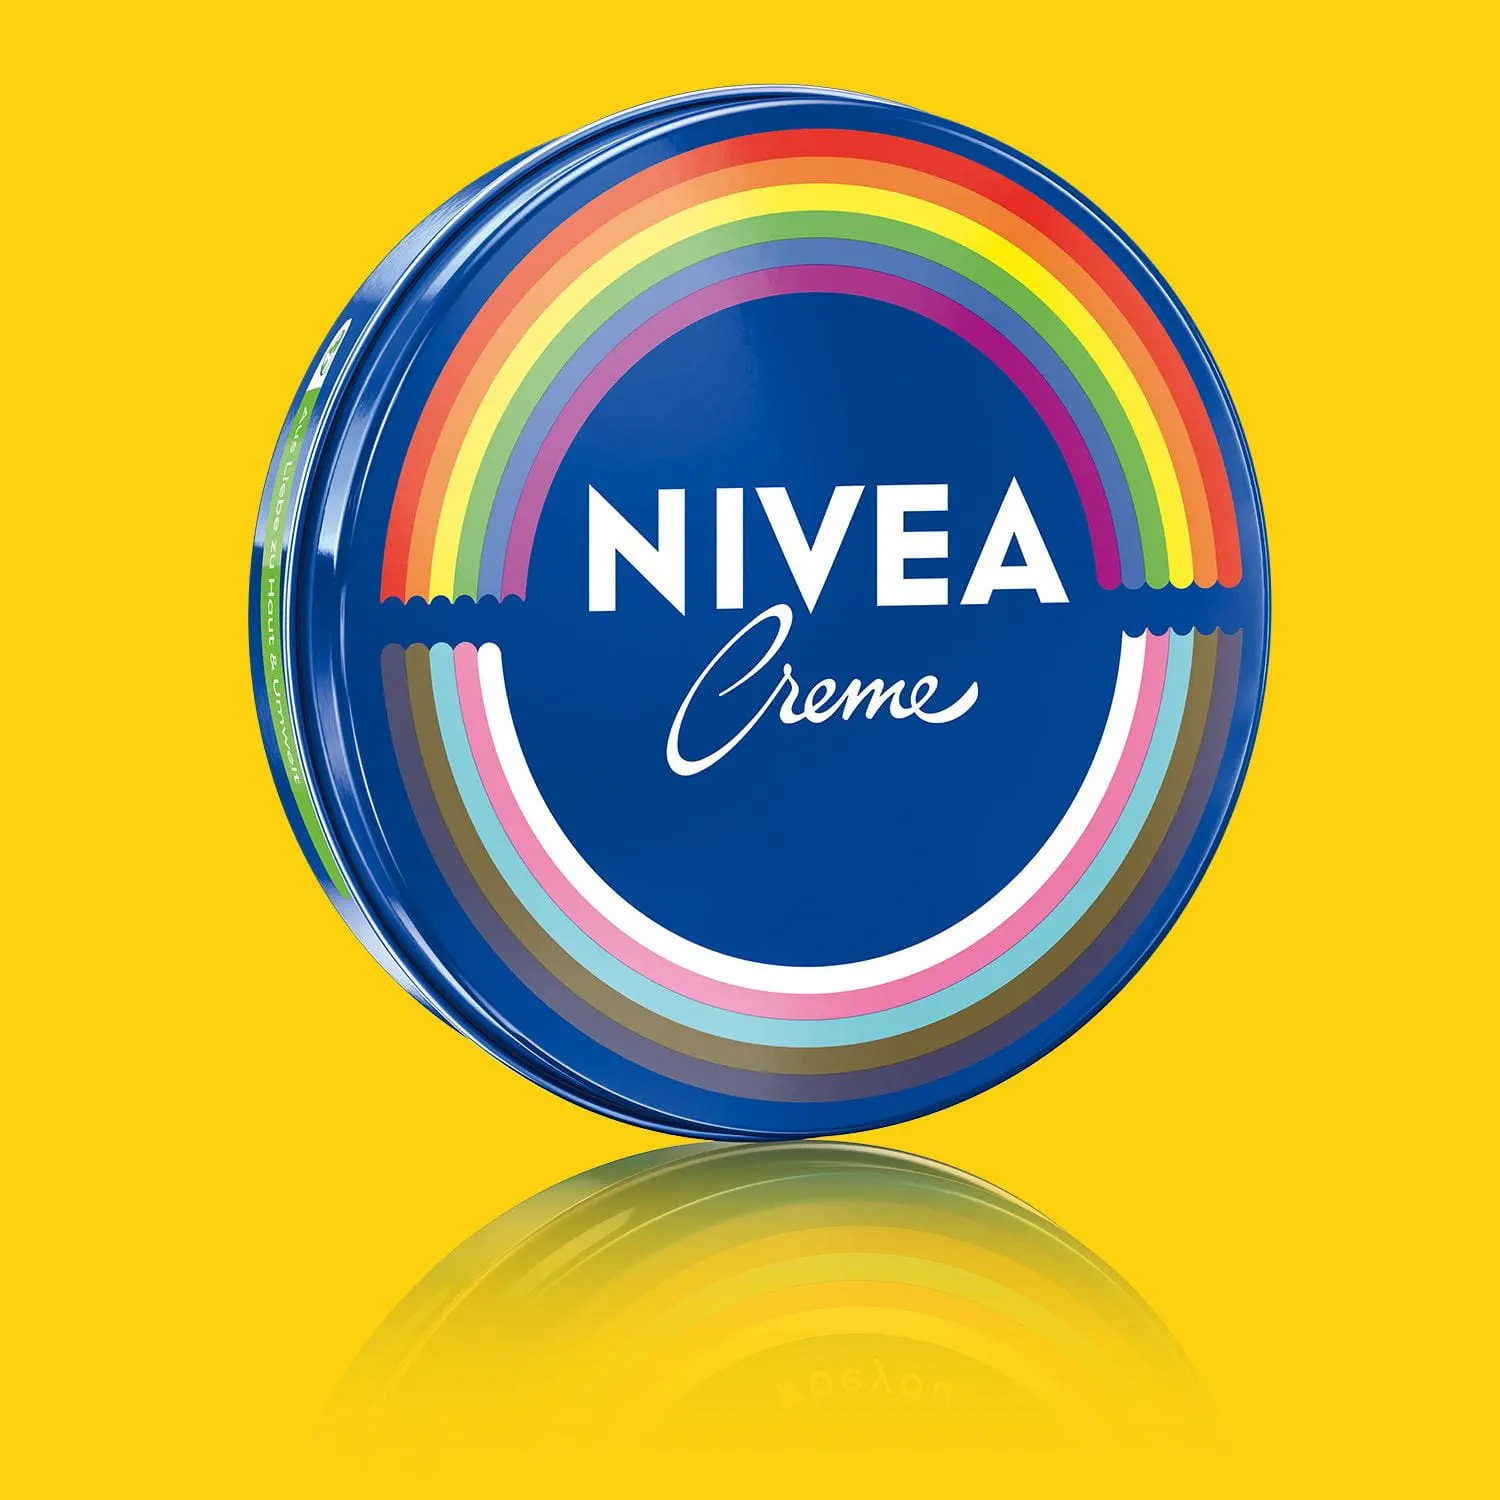 A Pride Limited Edition NIVEA Creme product in a blue tin with the pride rainbow printed on the front, against a yellow background.